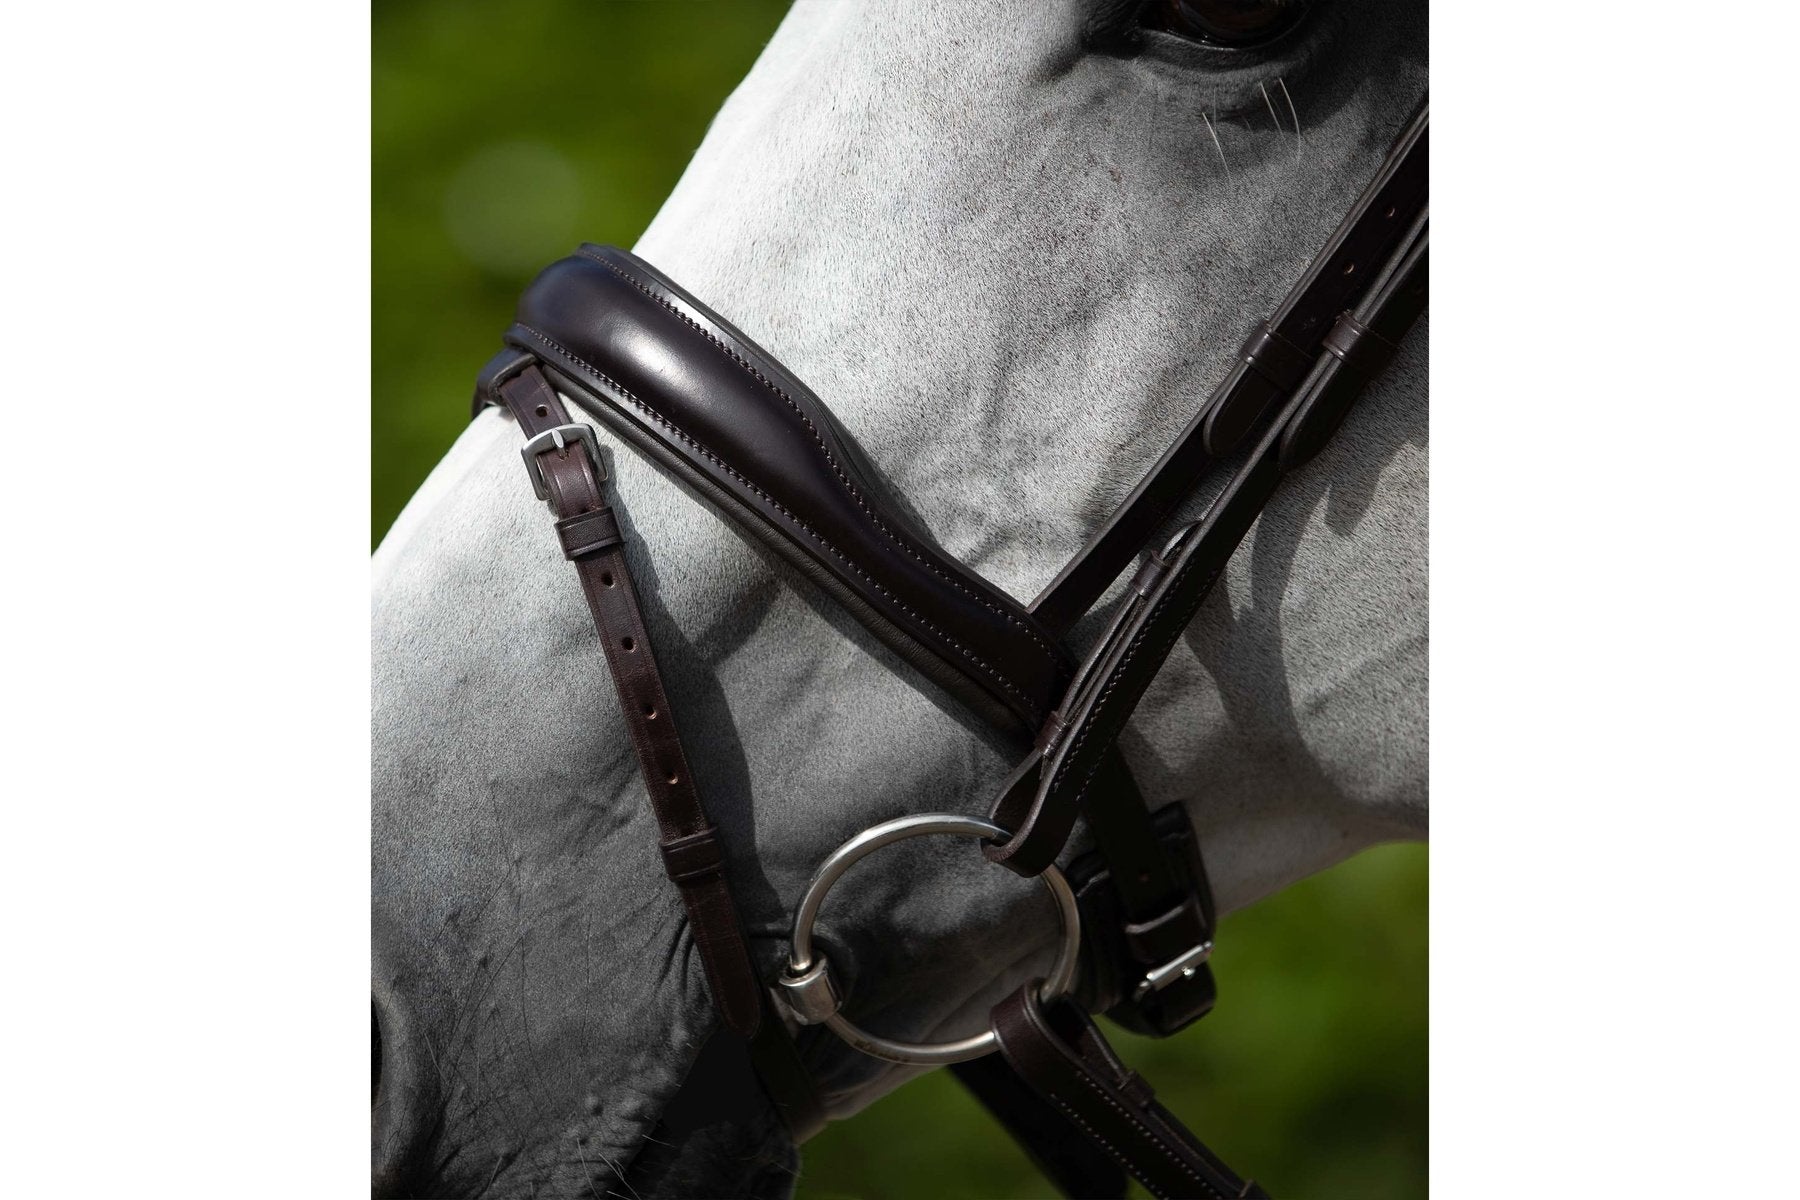 PE Rizzo Anatomic Snaffle Bridle with Flash